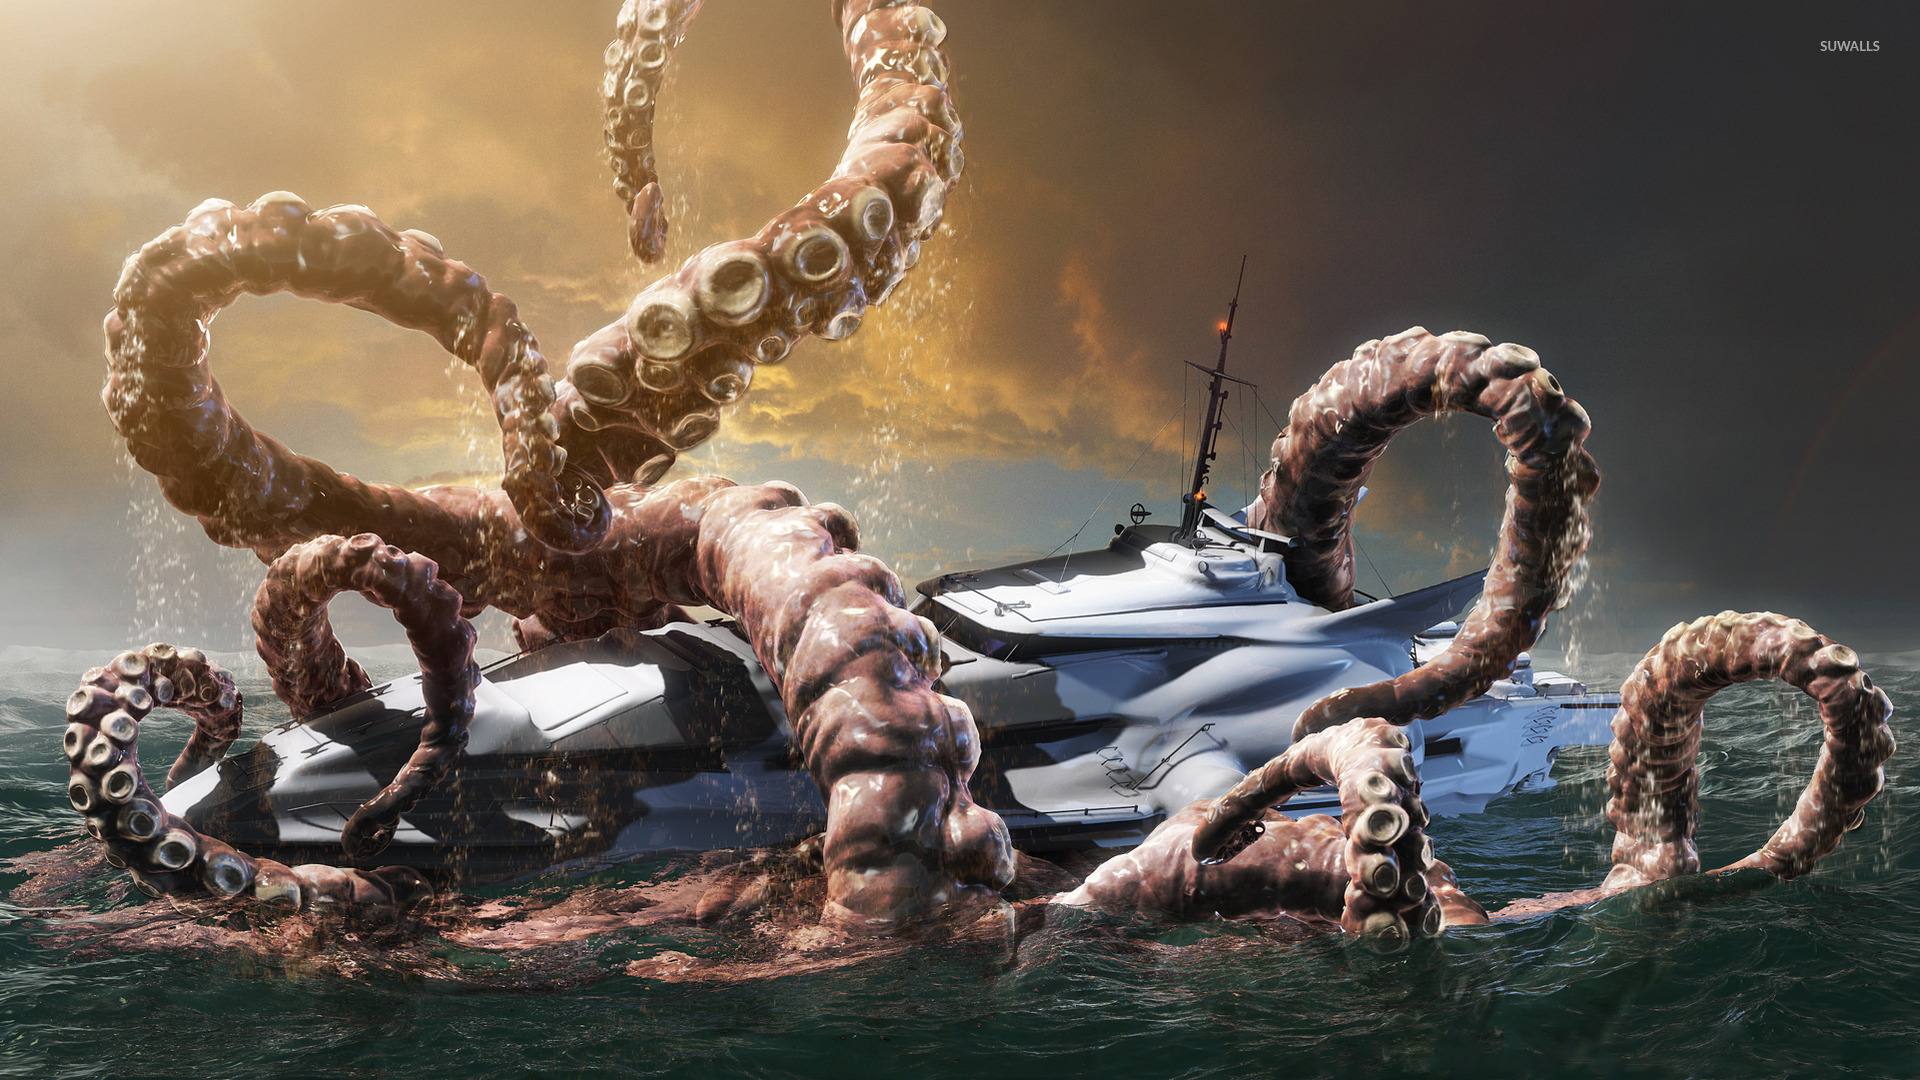 Kraken fighting with a yacht wallpaper  Fantasy wallpapers  46878